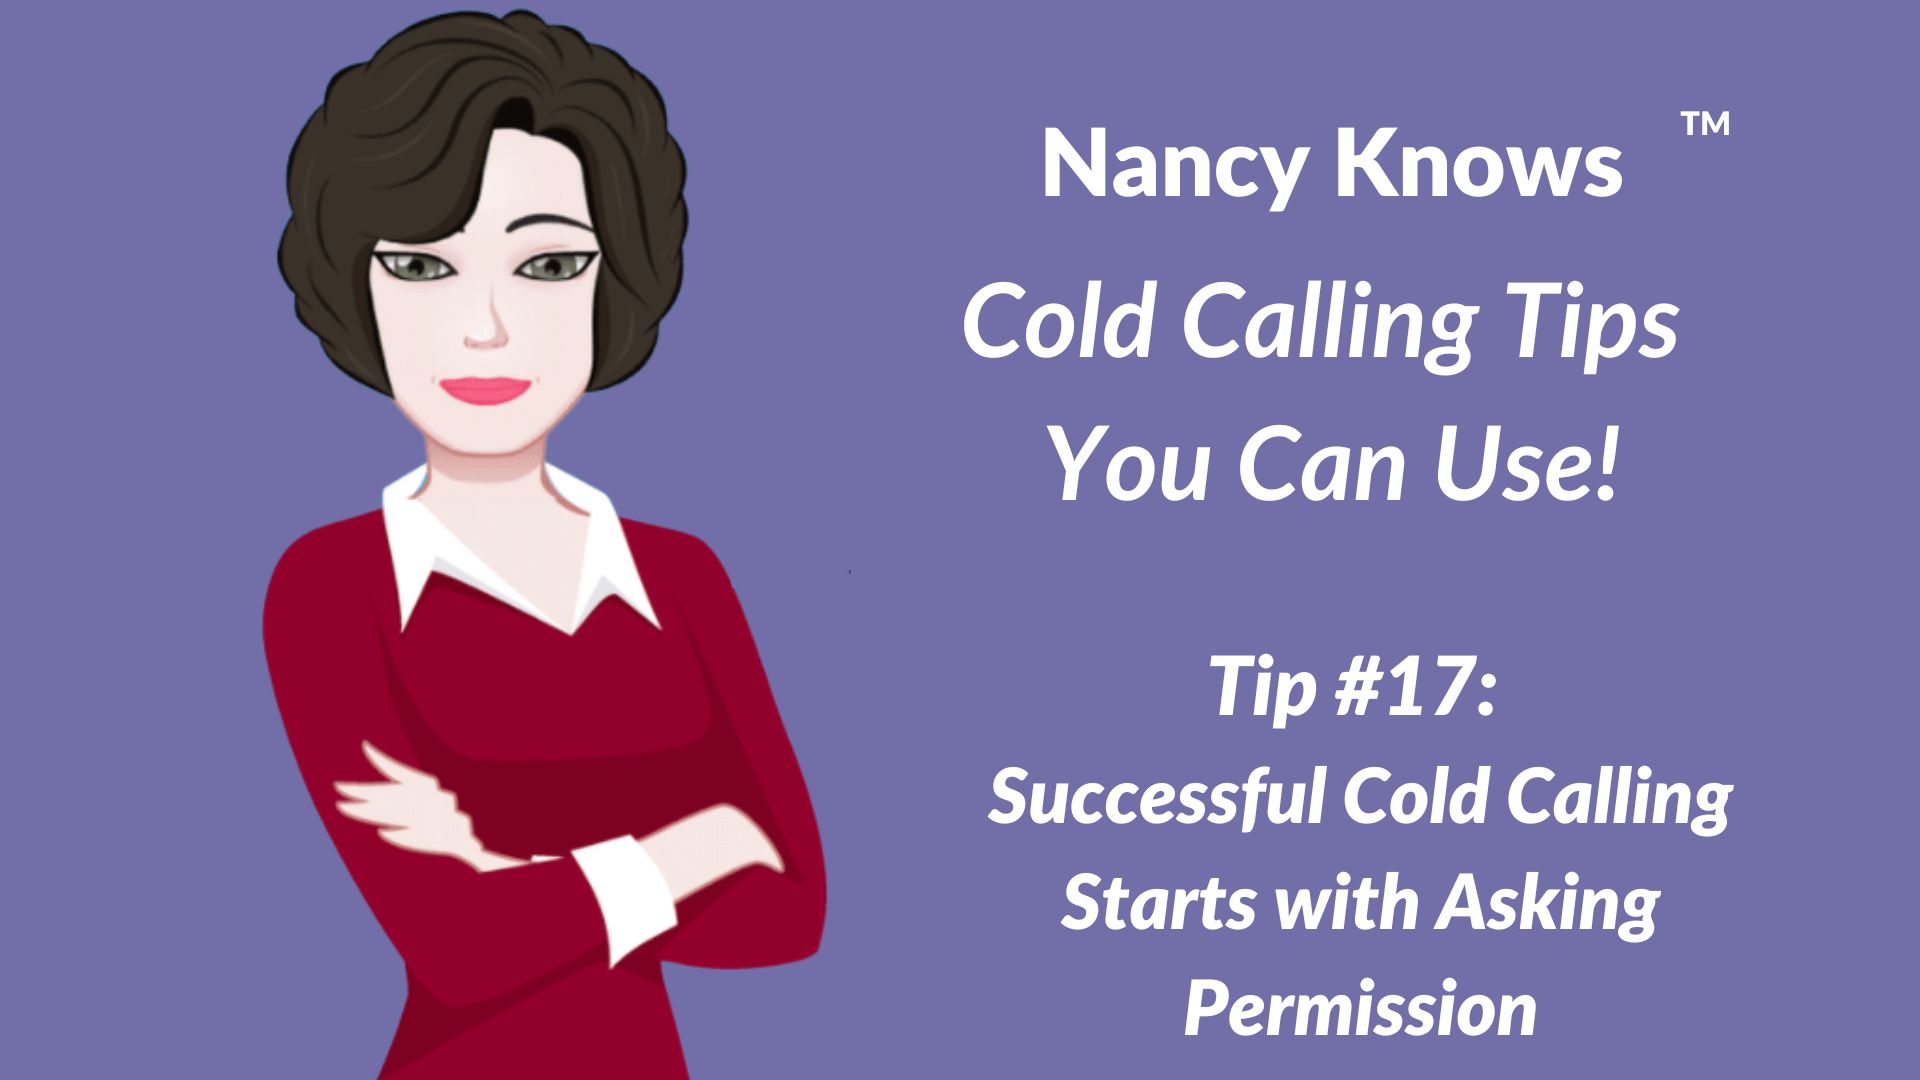 Nancy Knows #17: Successful Cold Calling Starts with Asking for Permission